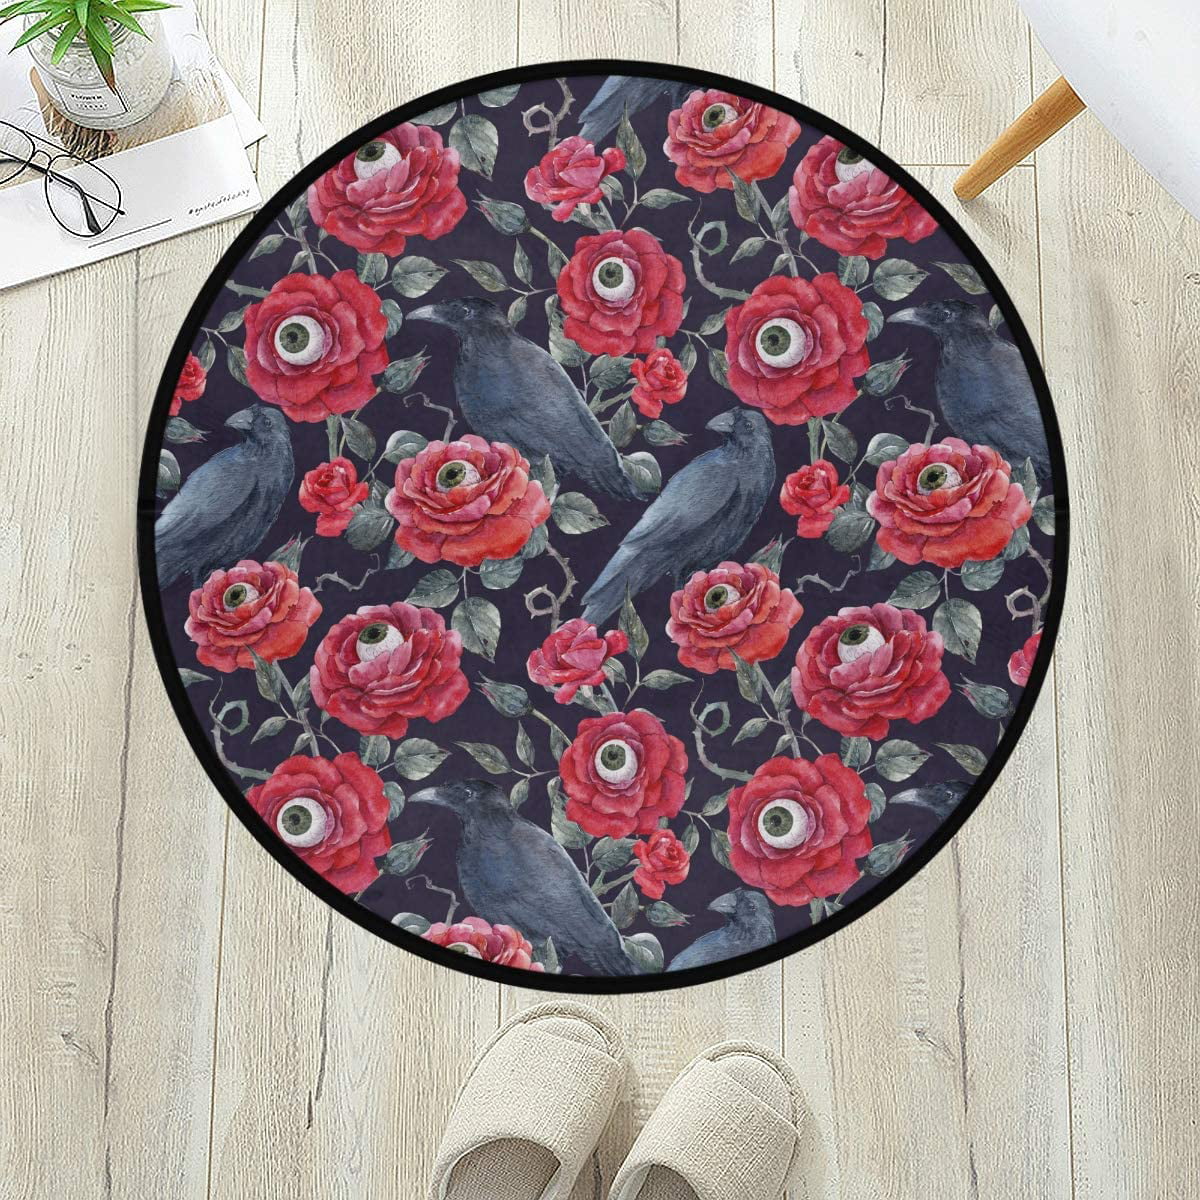 Round Rug Pumpkin Flower Leaves Fruit Non-Slip Circular Area Rugs Computer Chair Mat Comfortable Living Room Bedroom Area Rug,Washable Durable Play Mat 36.2 in